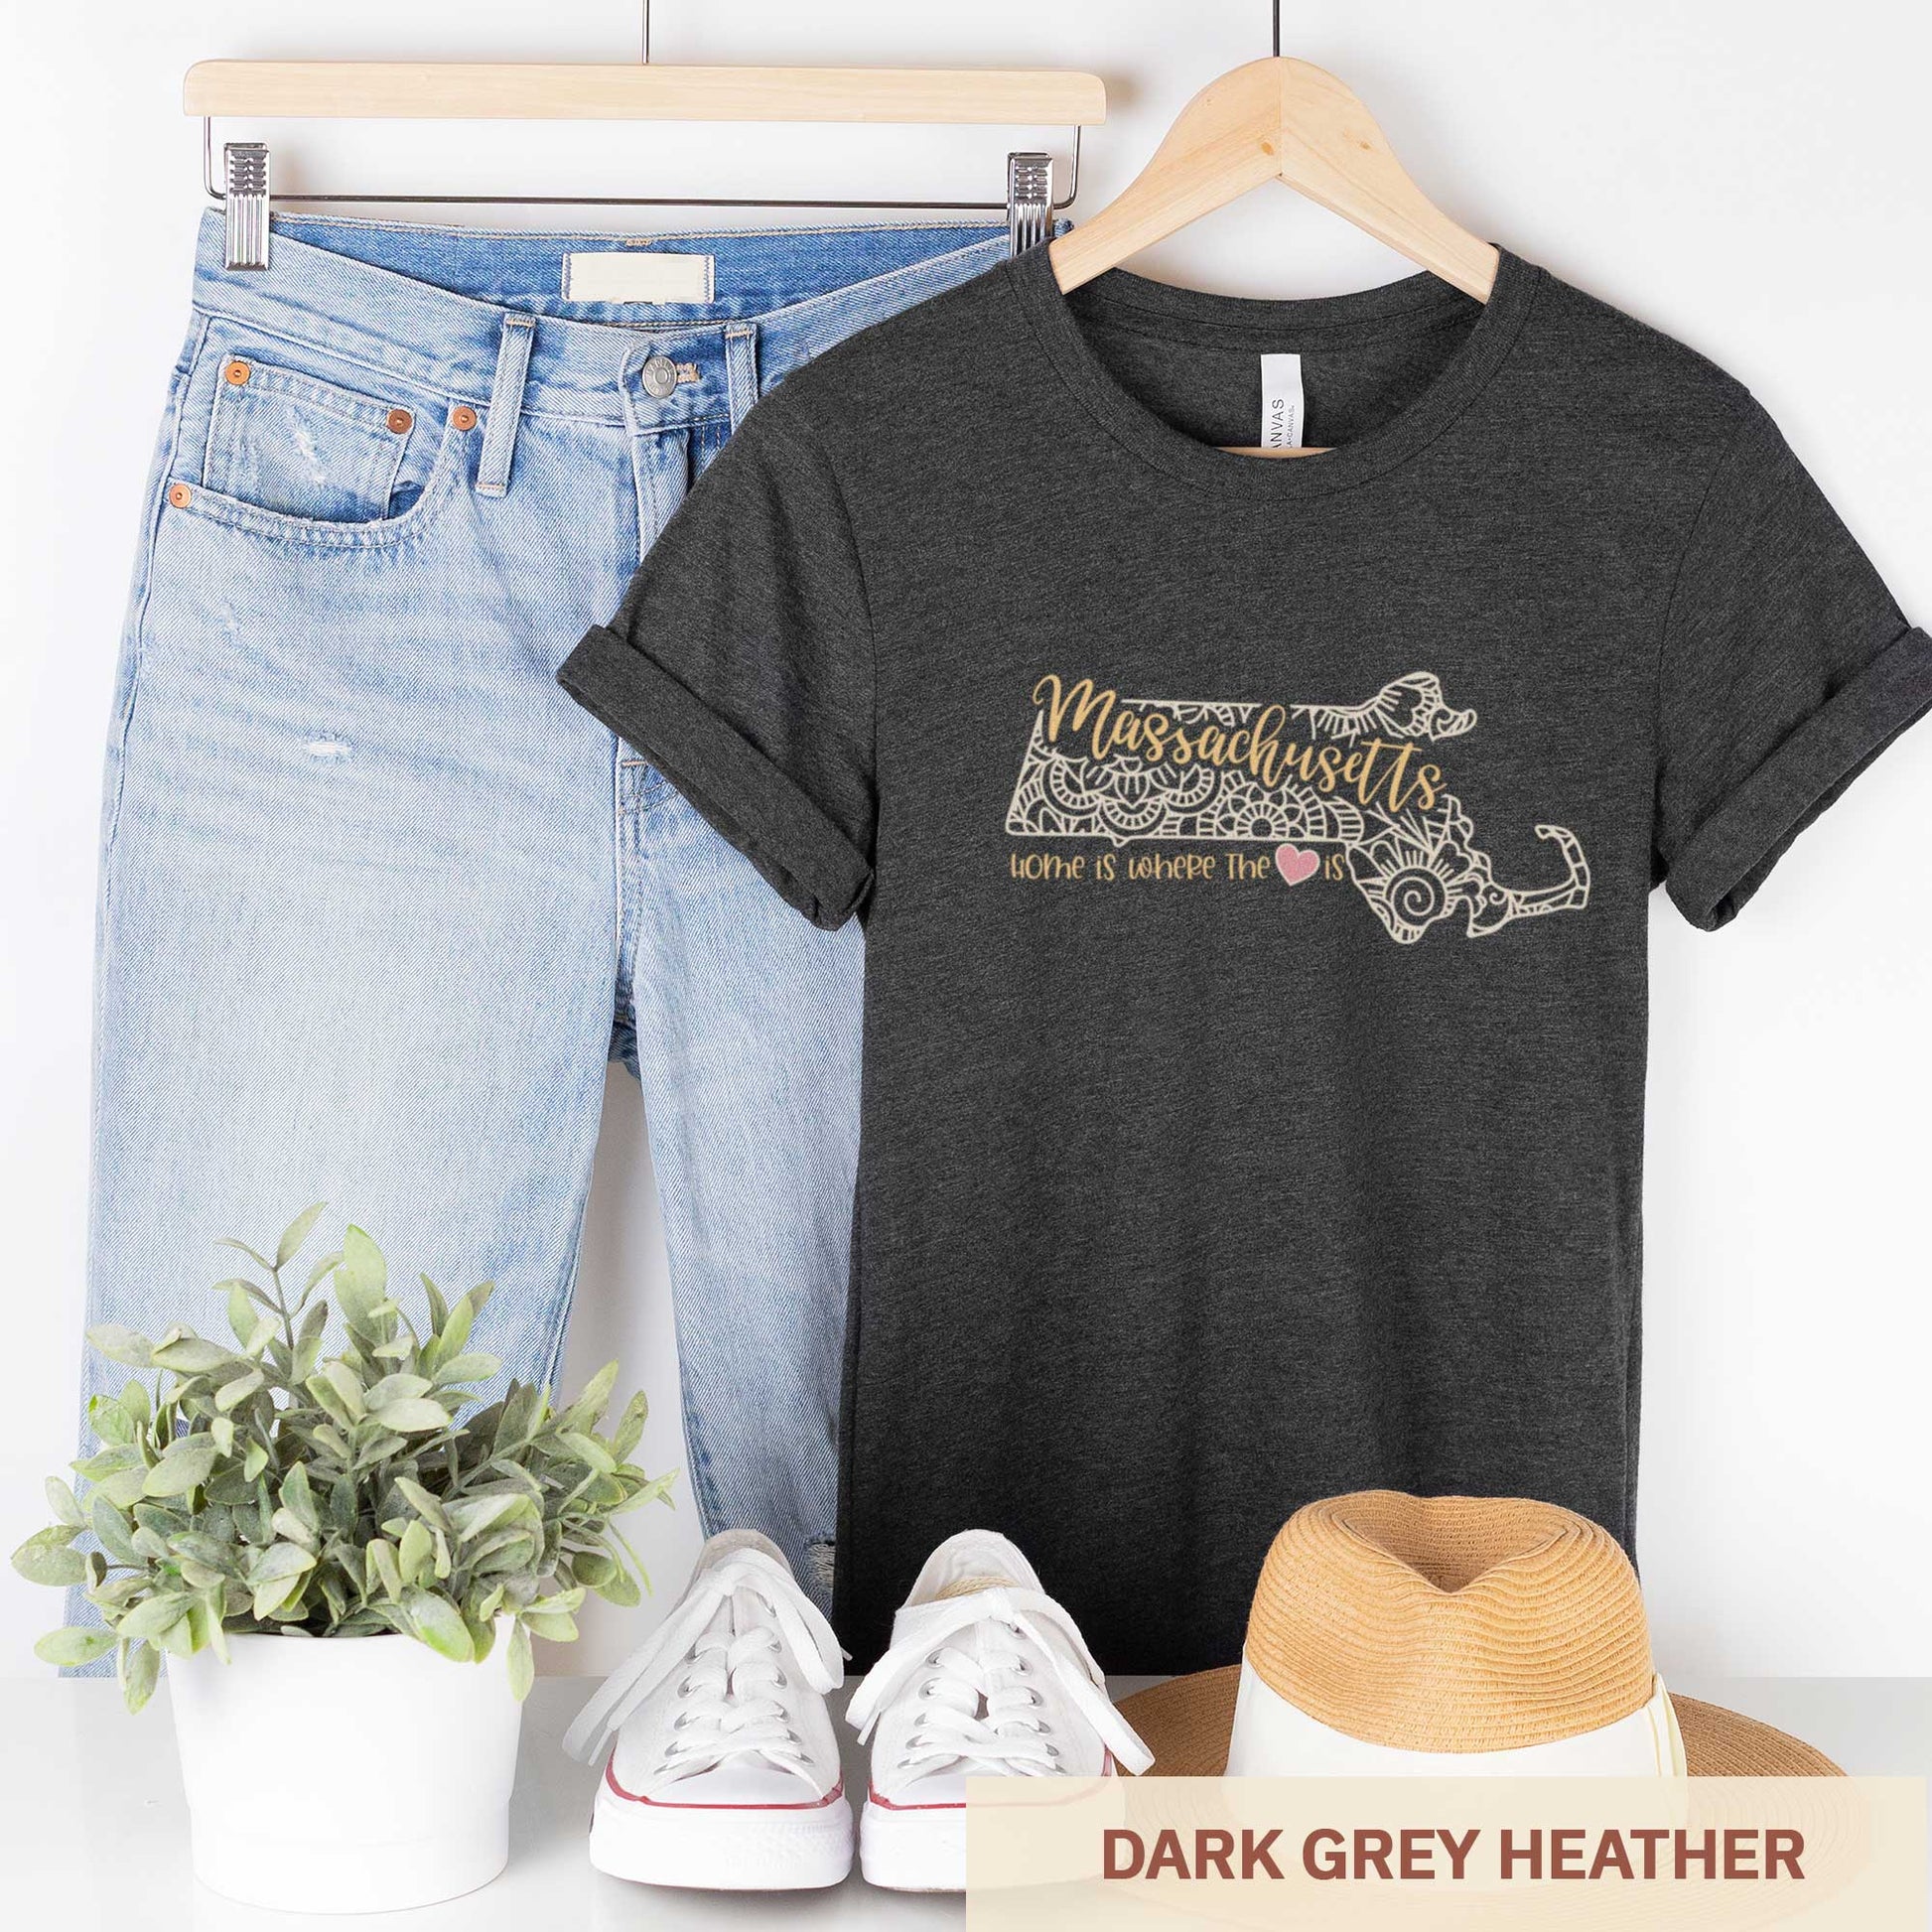 A hanging dark grey heather Bella Canvas t-shirt featuring a mandala in the shape of Massachusetts with the words home is where the heart is.